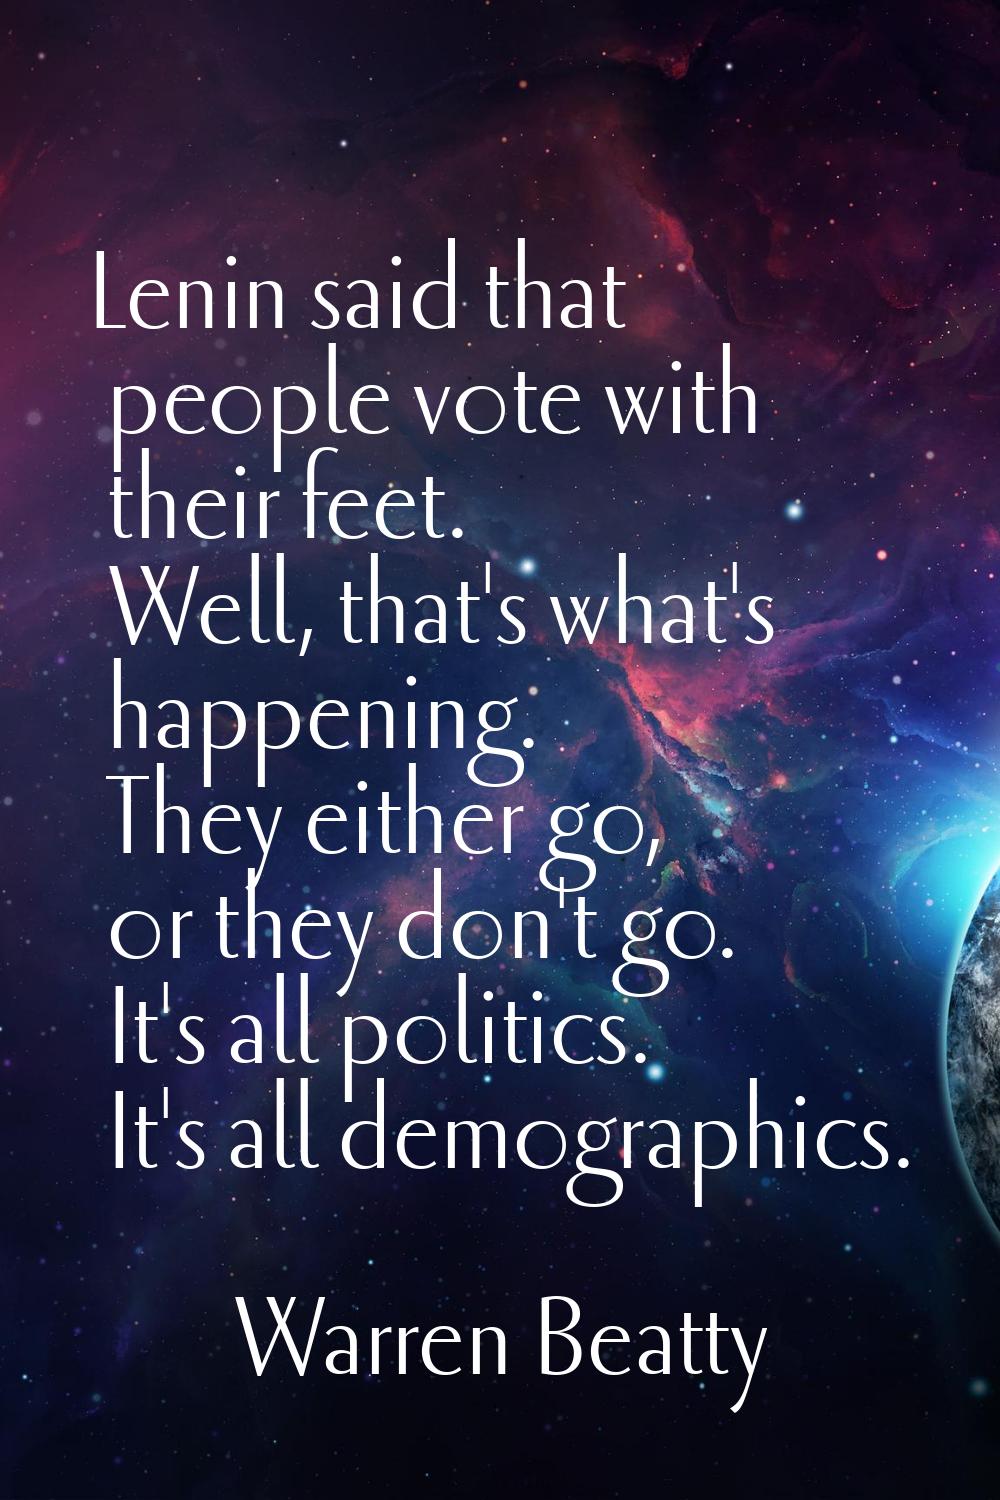 Lenin said that people vote with their feet. Well, that's what's happening. They either go, or they